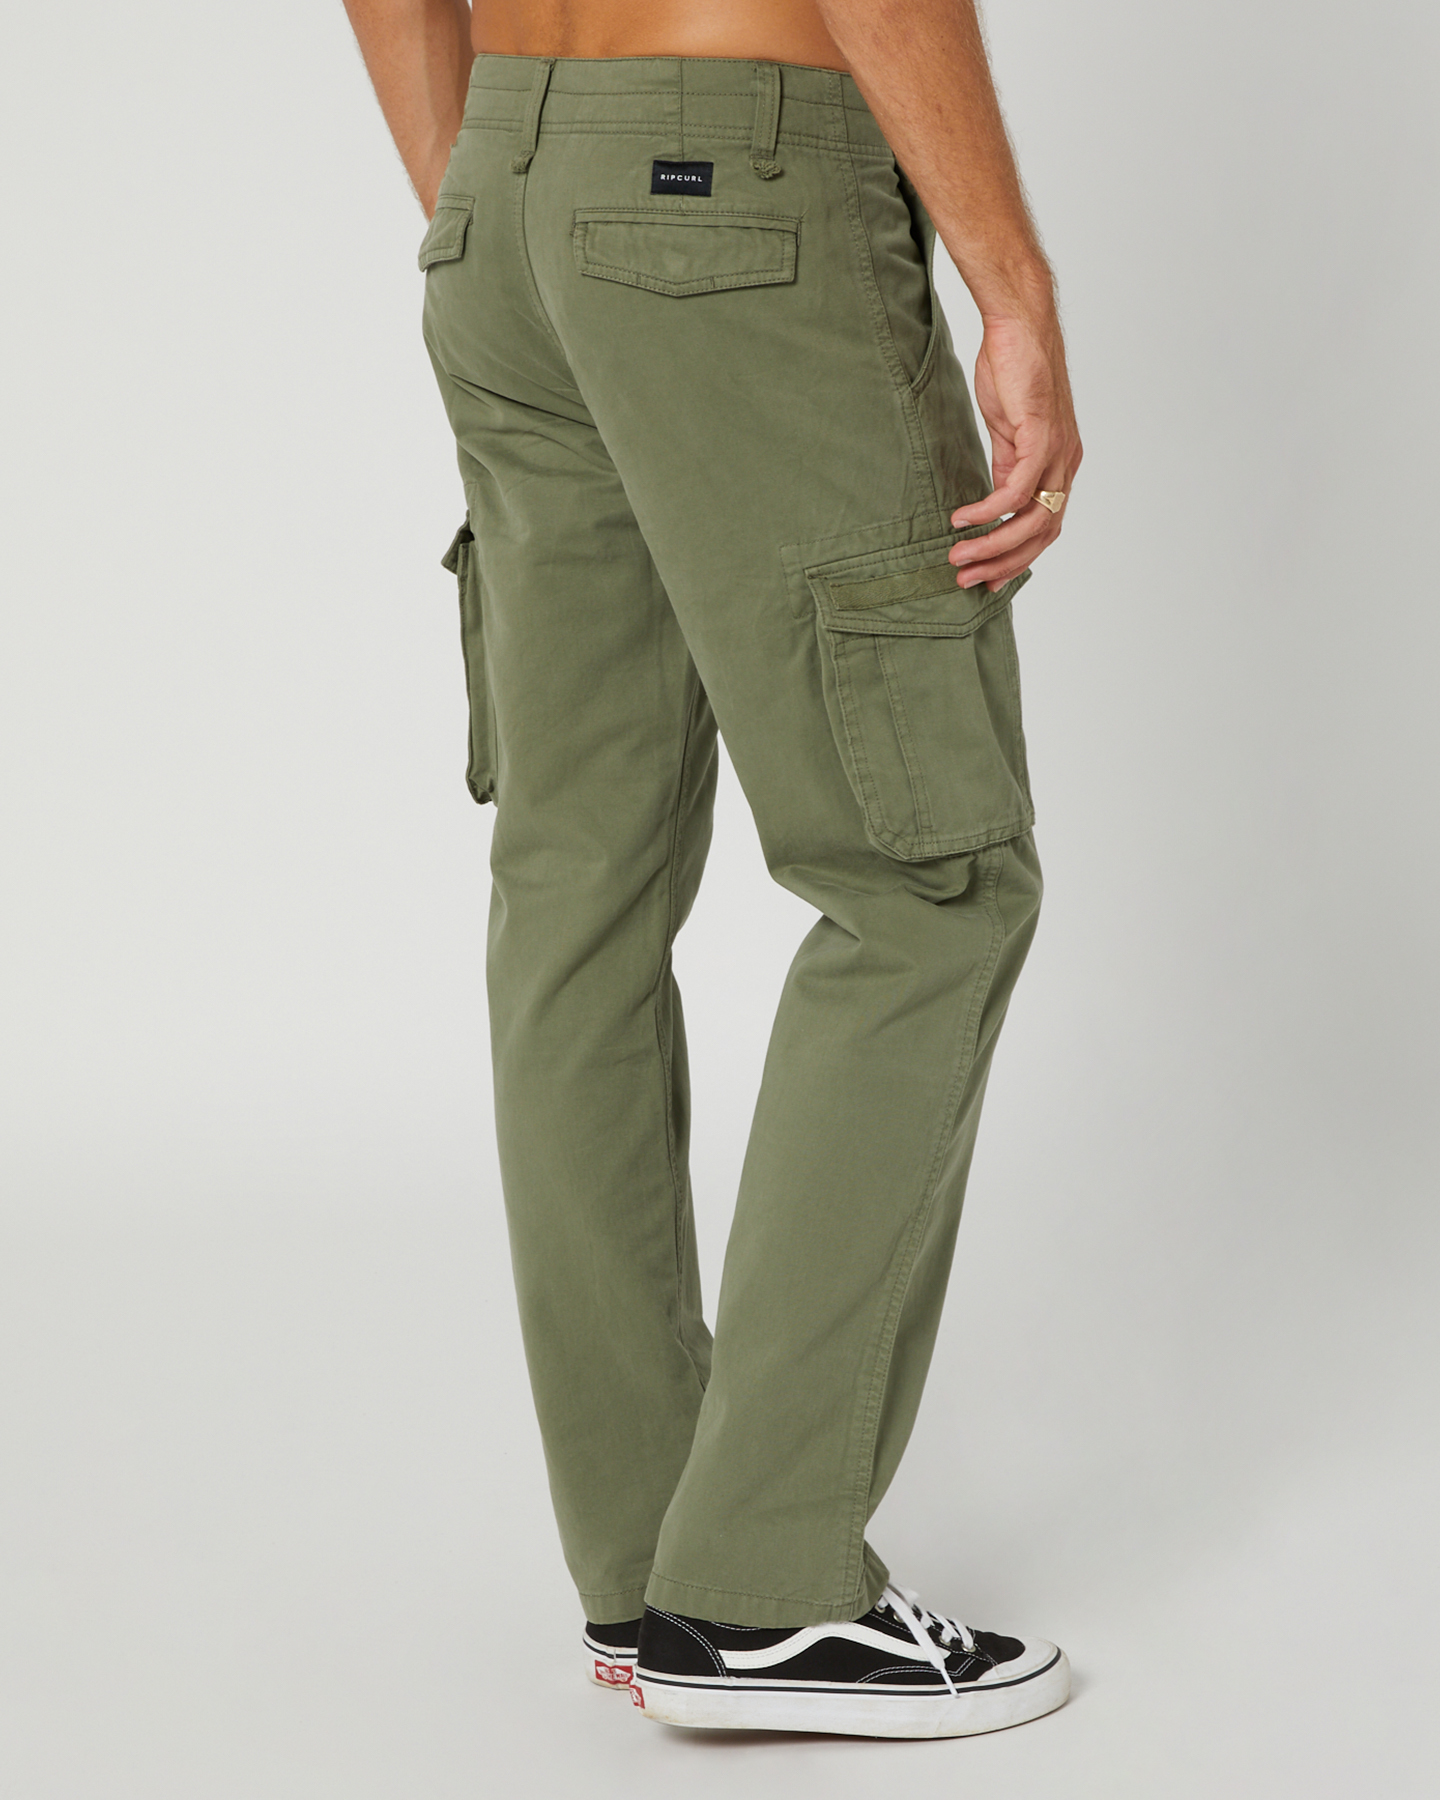 Rip Curl Trail Mens Cargo Pant - Light Green | SurfStitch